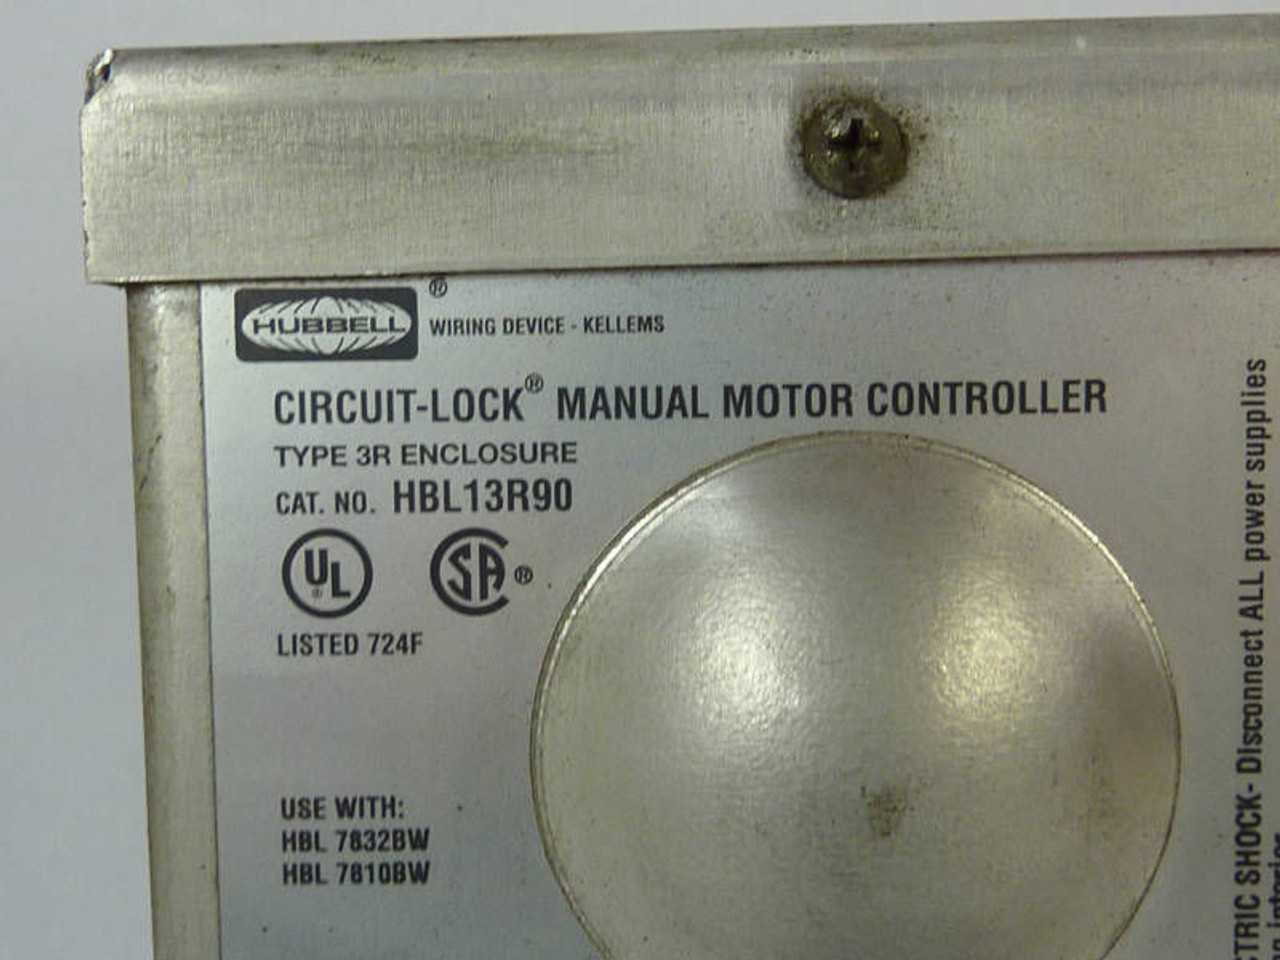 Hubbell Manual Motor Control HBL13R90 USED